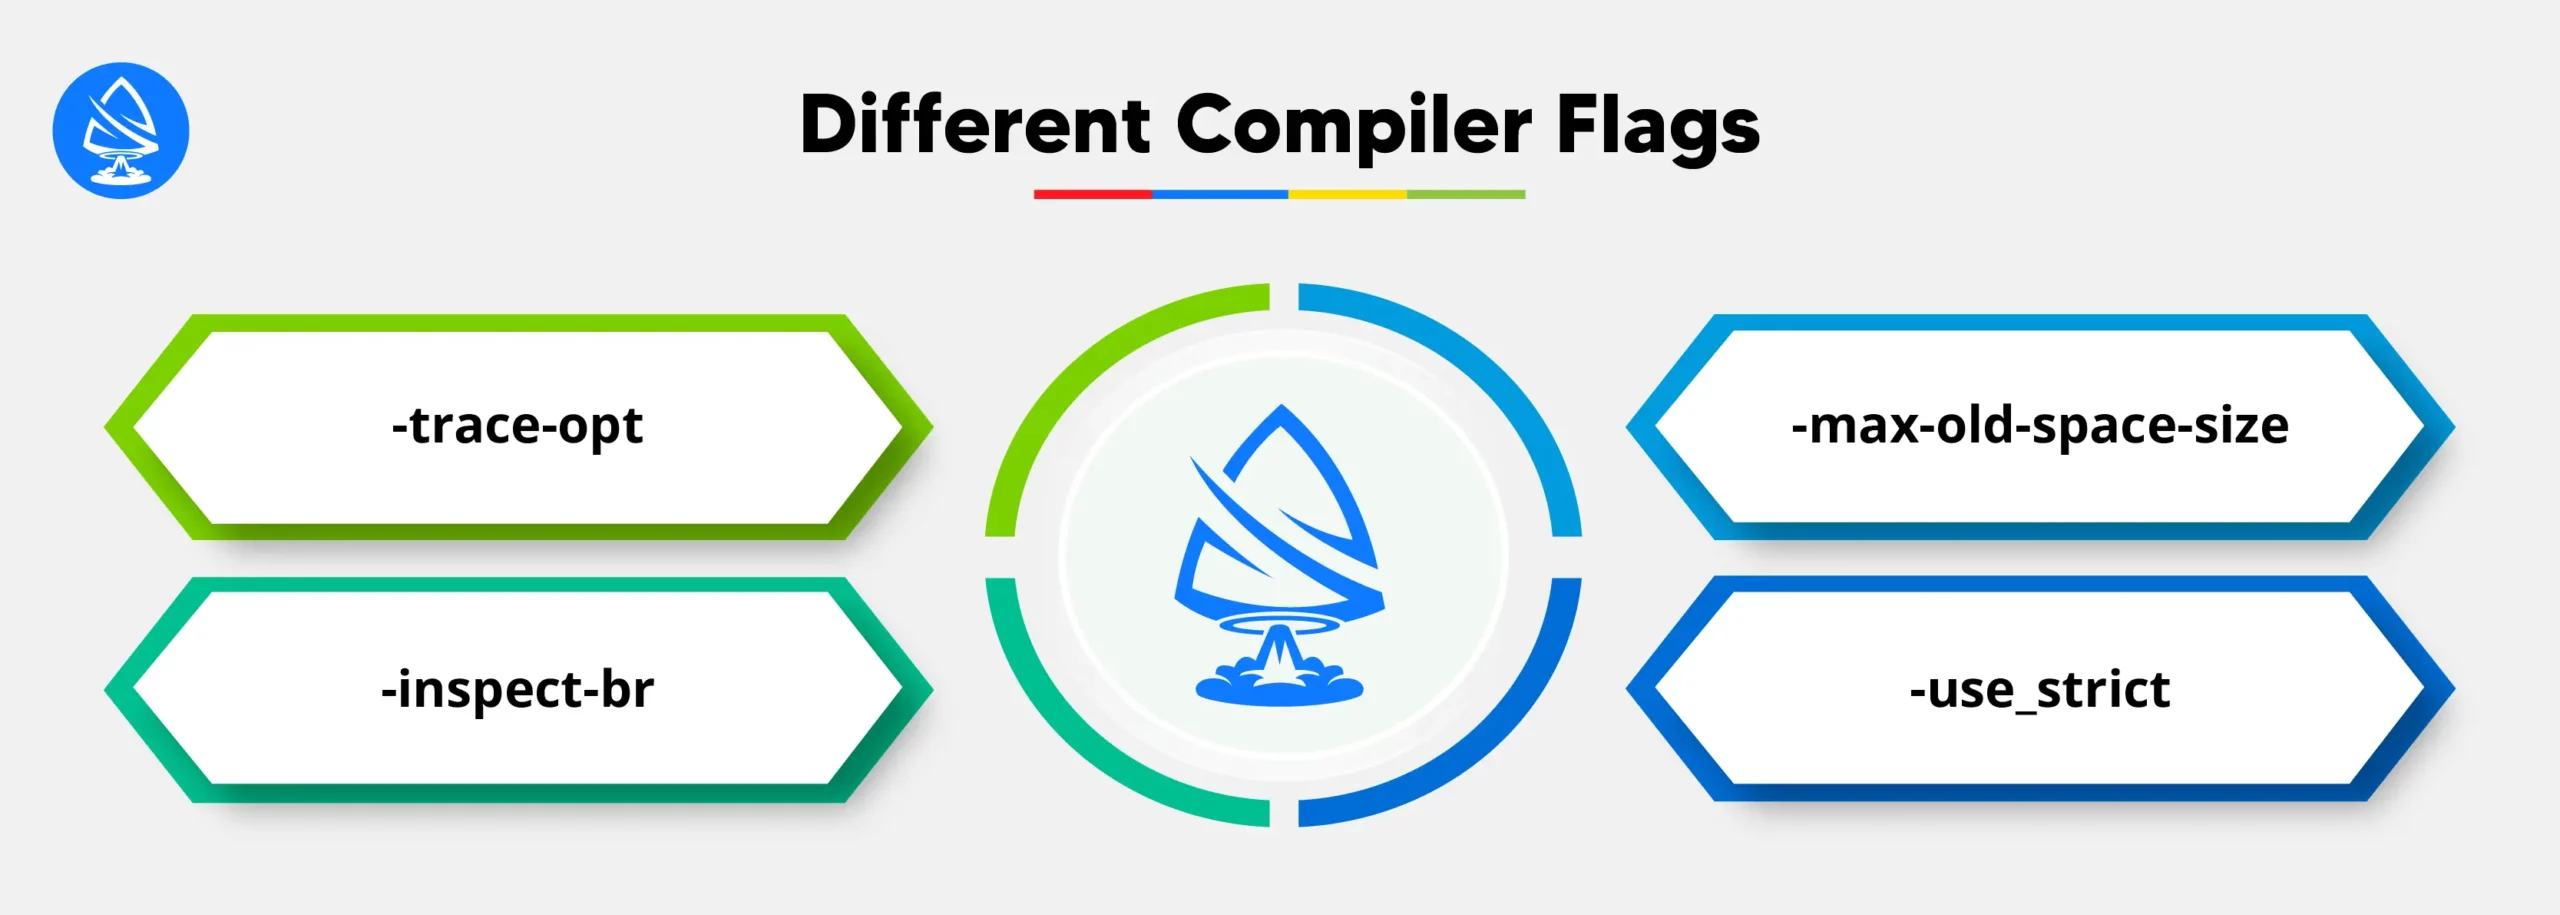 Different Compiler Flags 